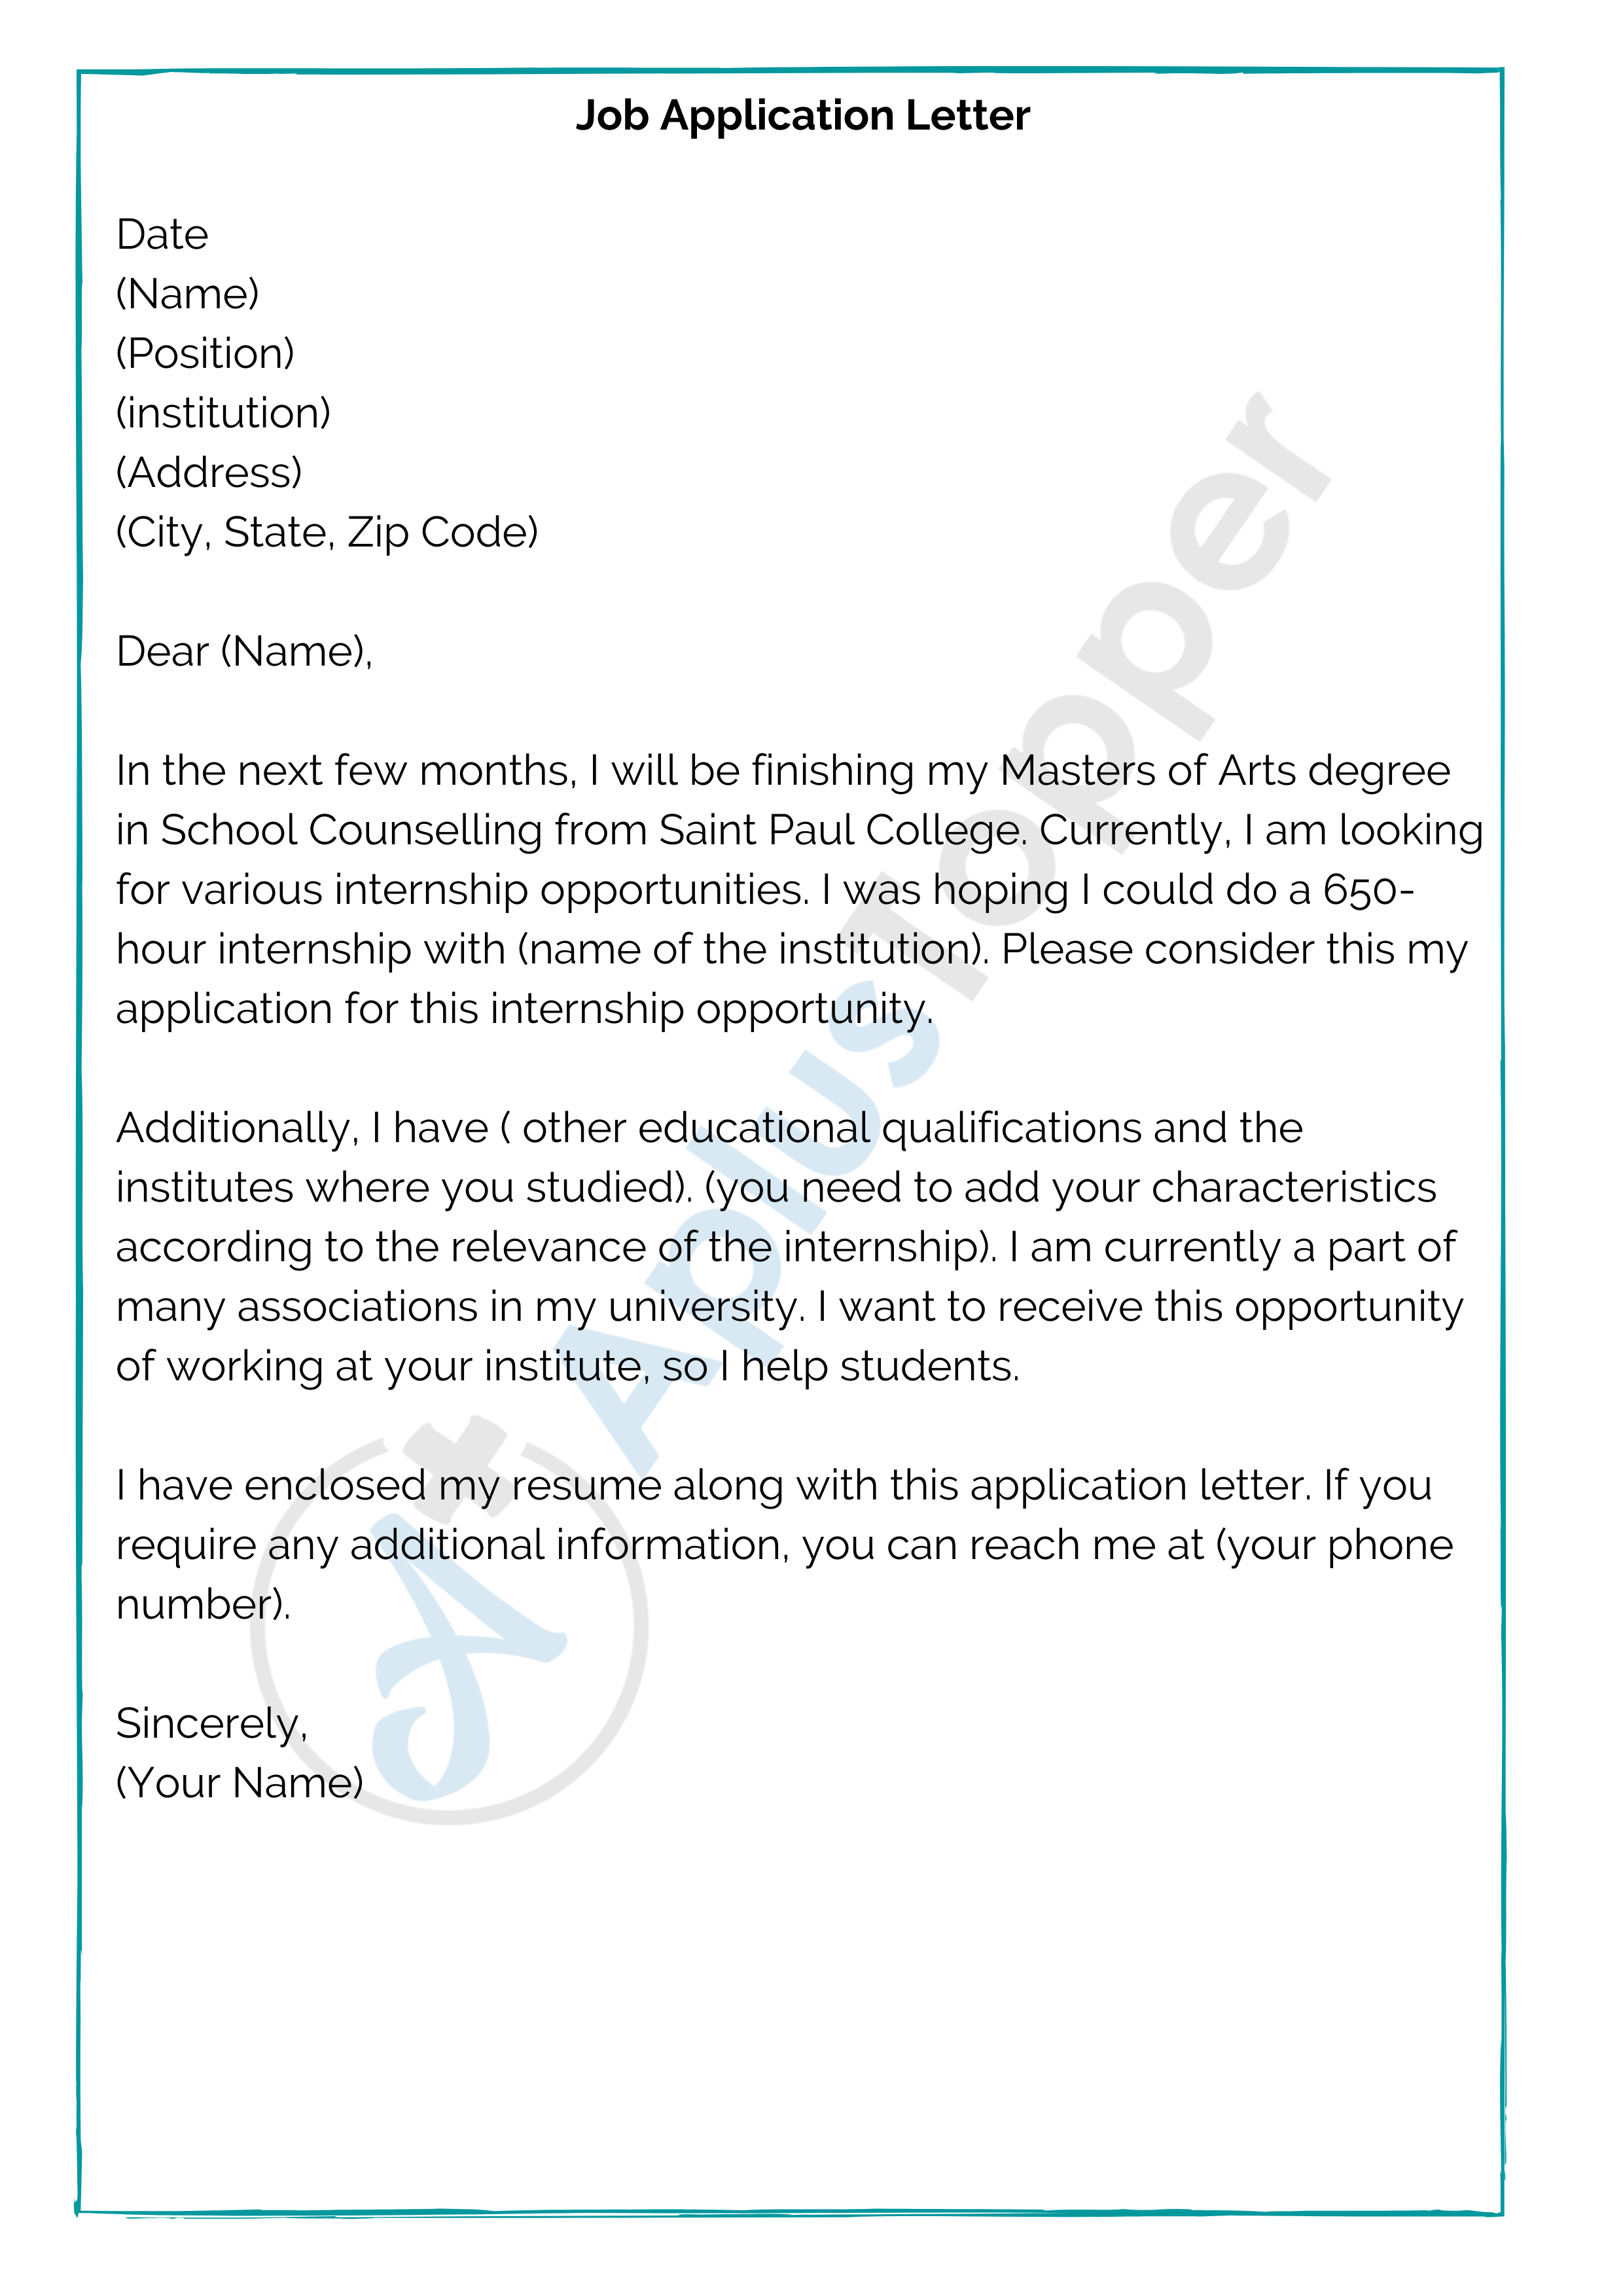 how to application letter to a company